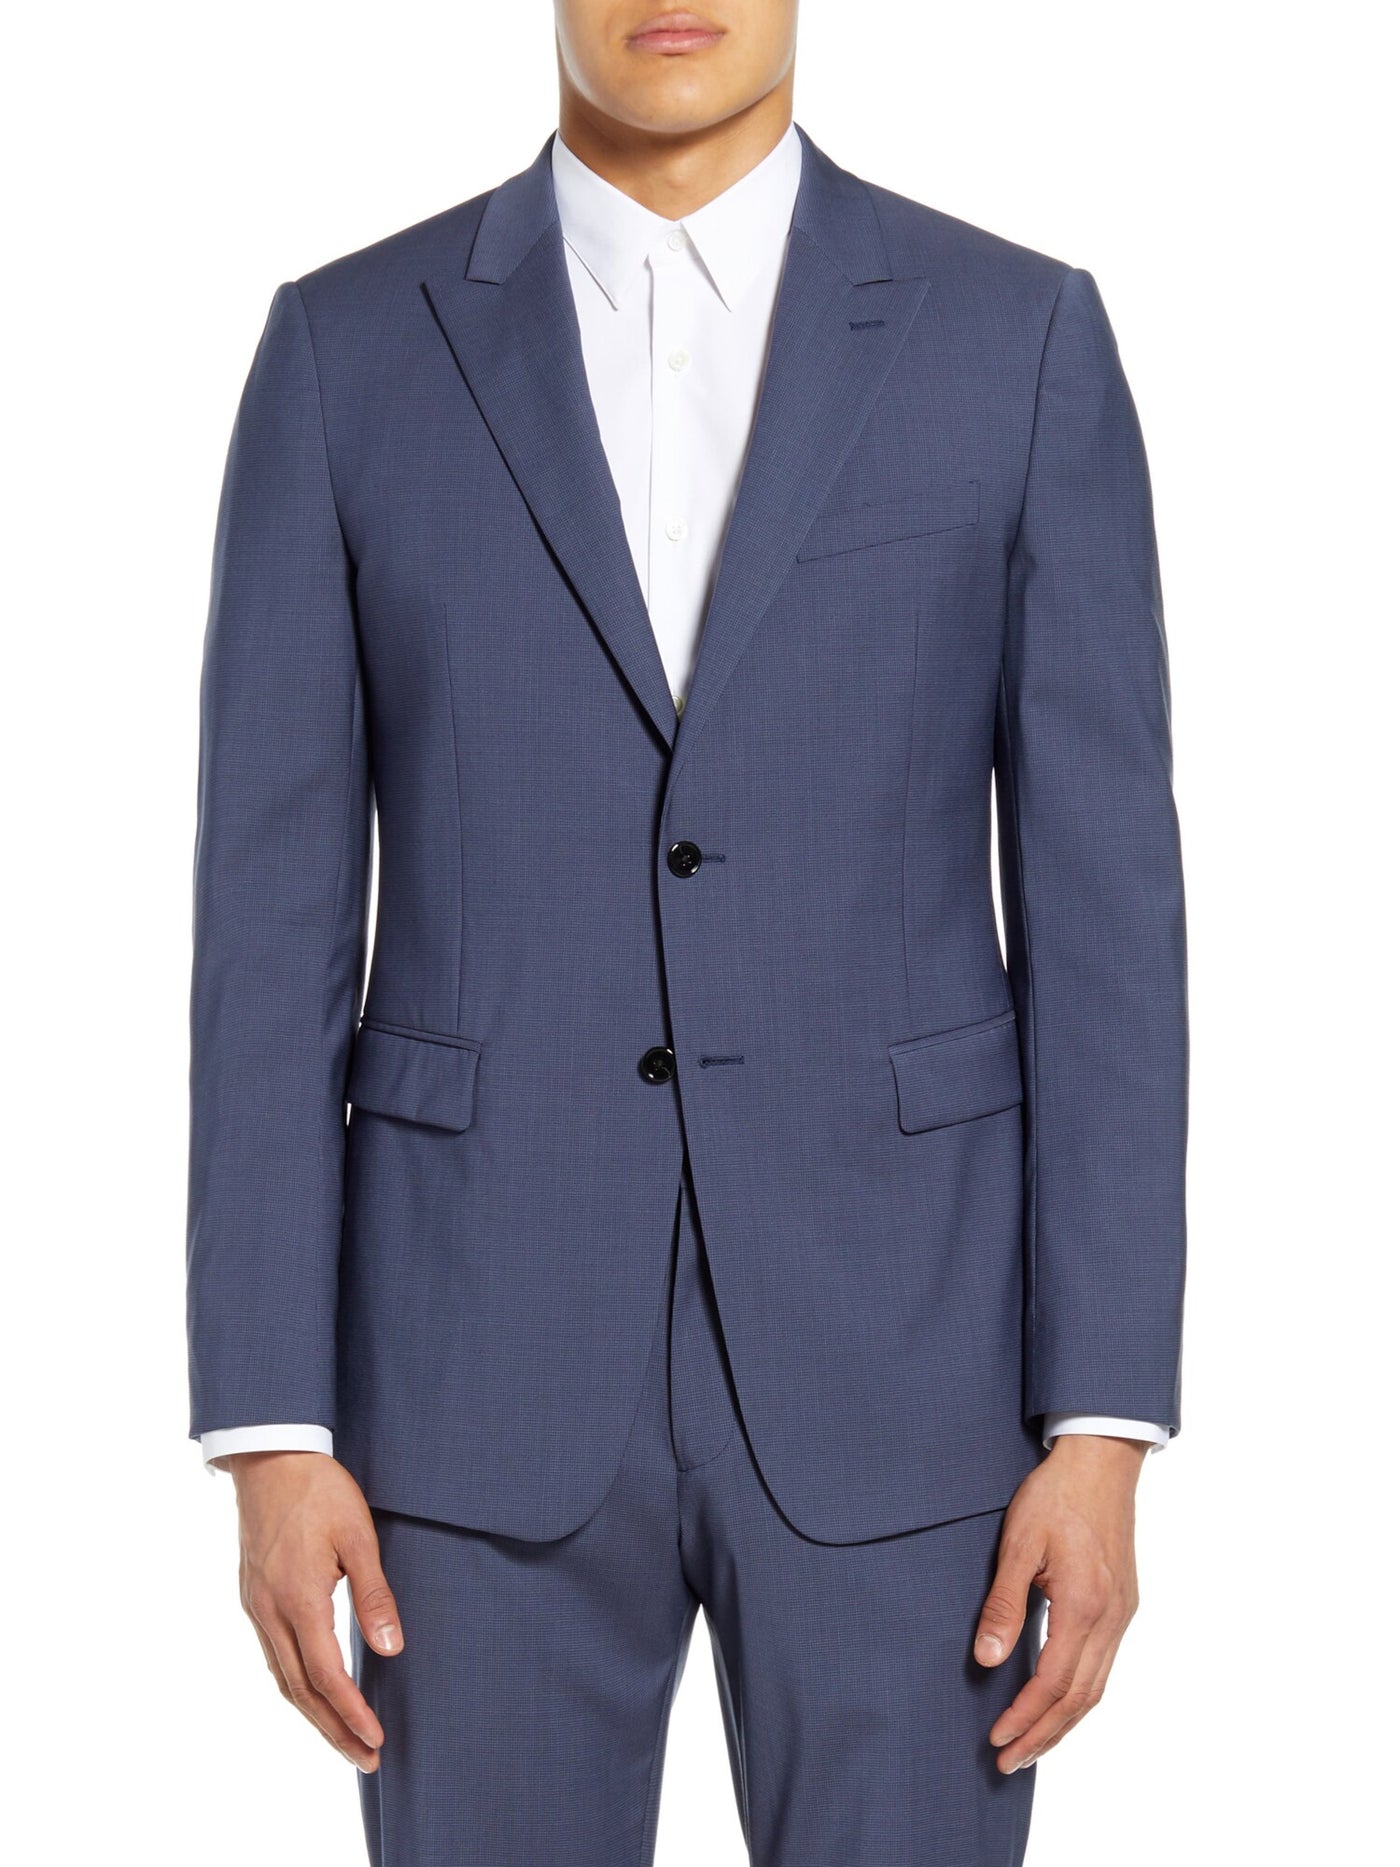 THEORY Mens Chambers Blue Single Breasted, Slim Fit Suit Separate Blazer Jacket 40 Short